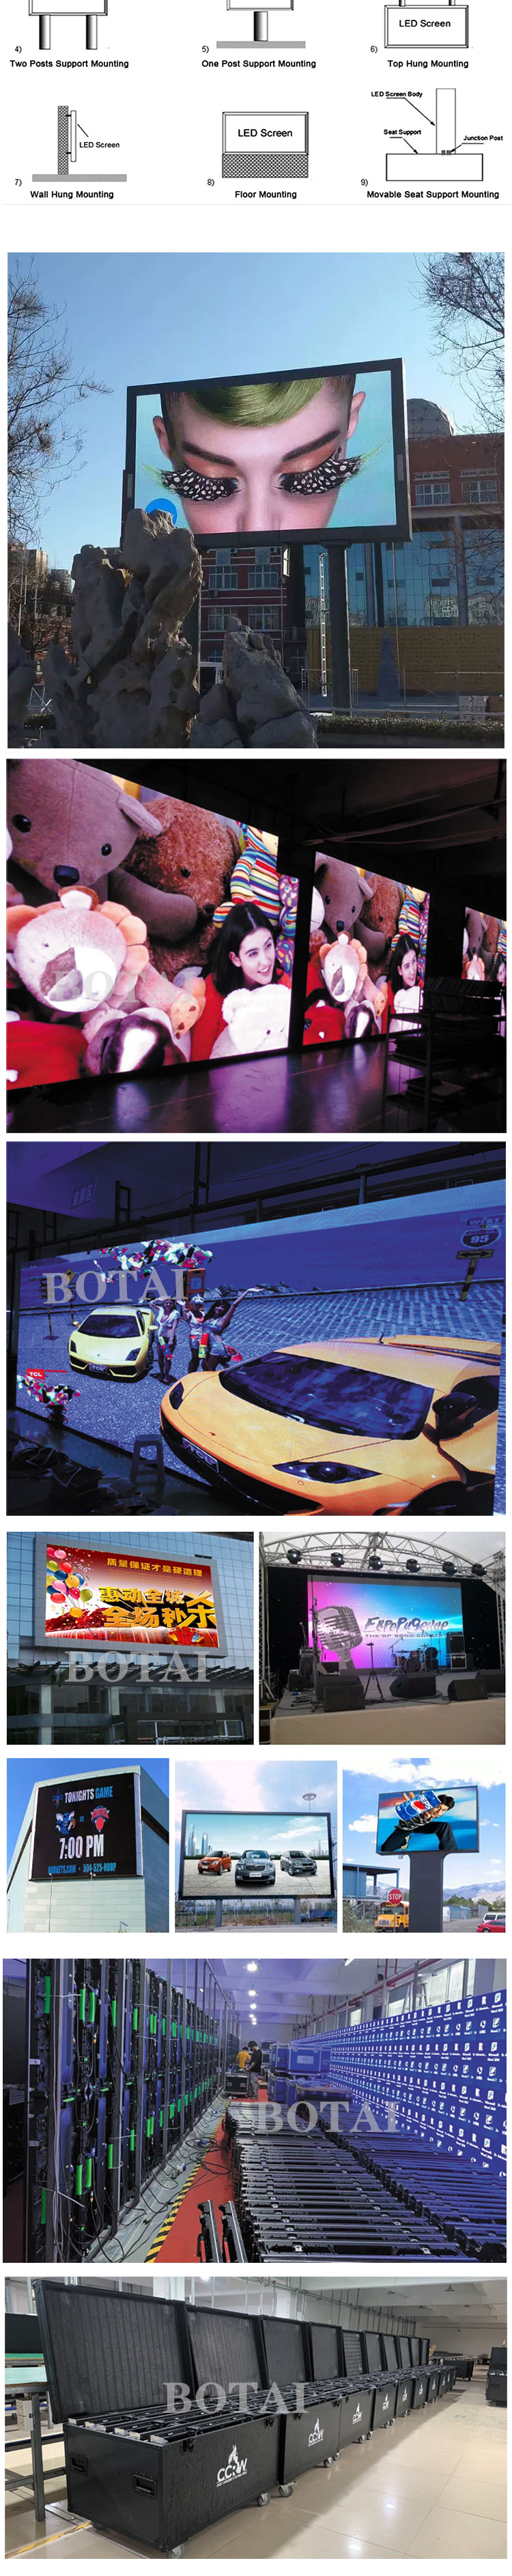 Botai P4 full color hd led screen xxxx video xxx videos hd indoor advertising led display supplies